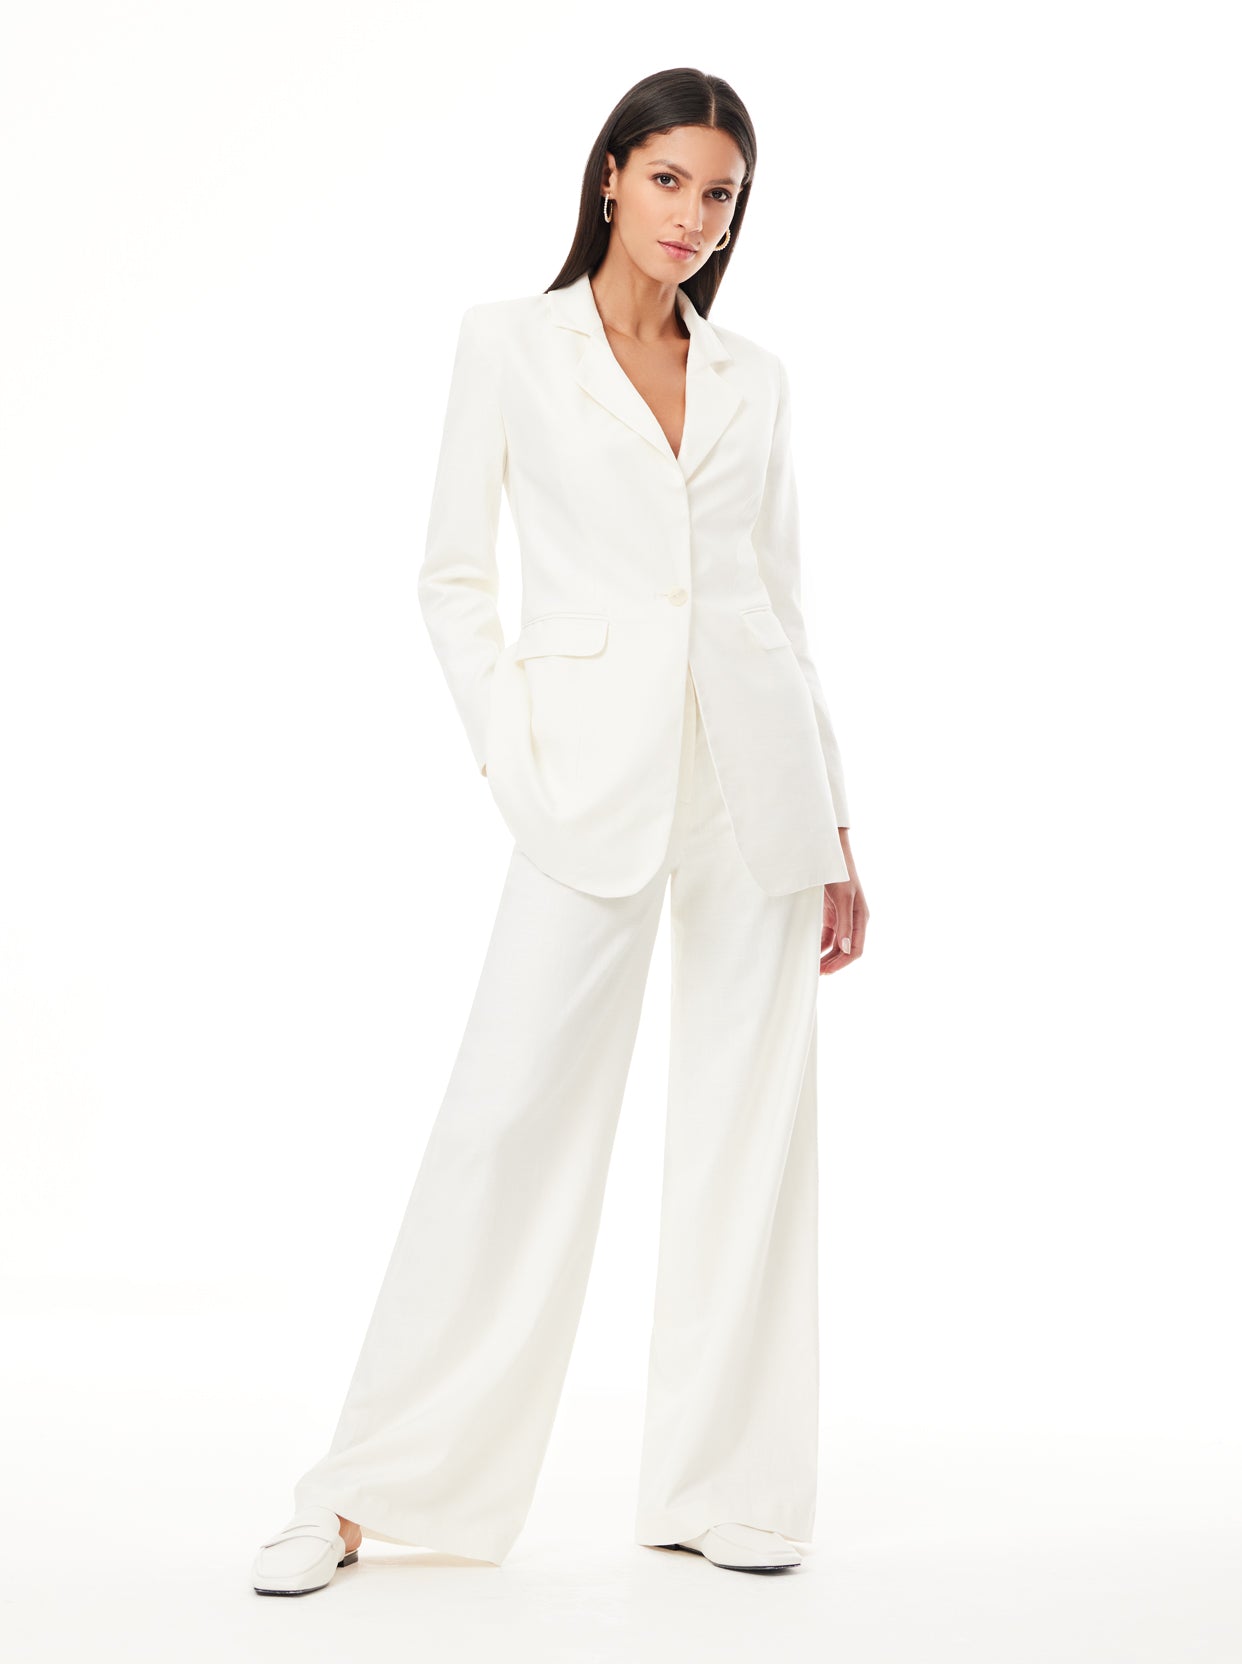 Suit Trousers  Womens Tailored Suit Trousers for Work  Hobbs London 